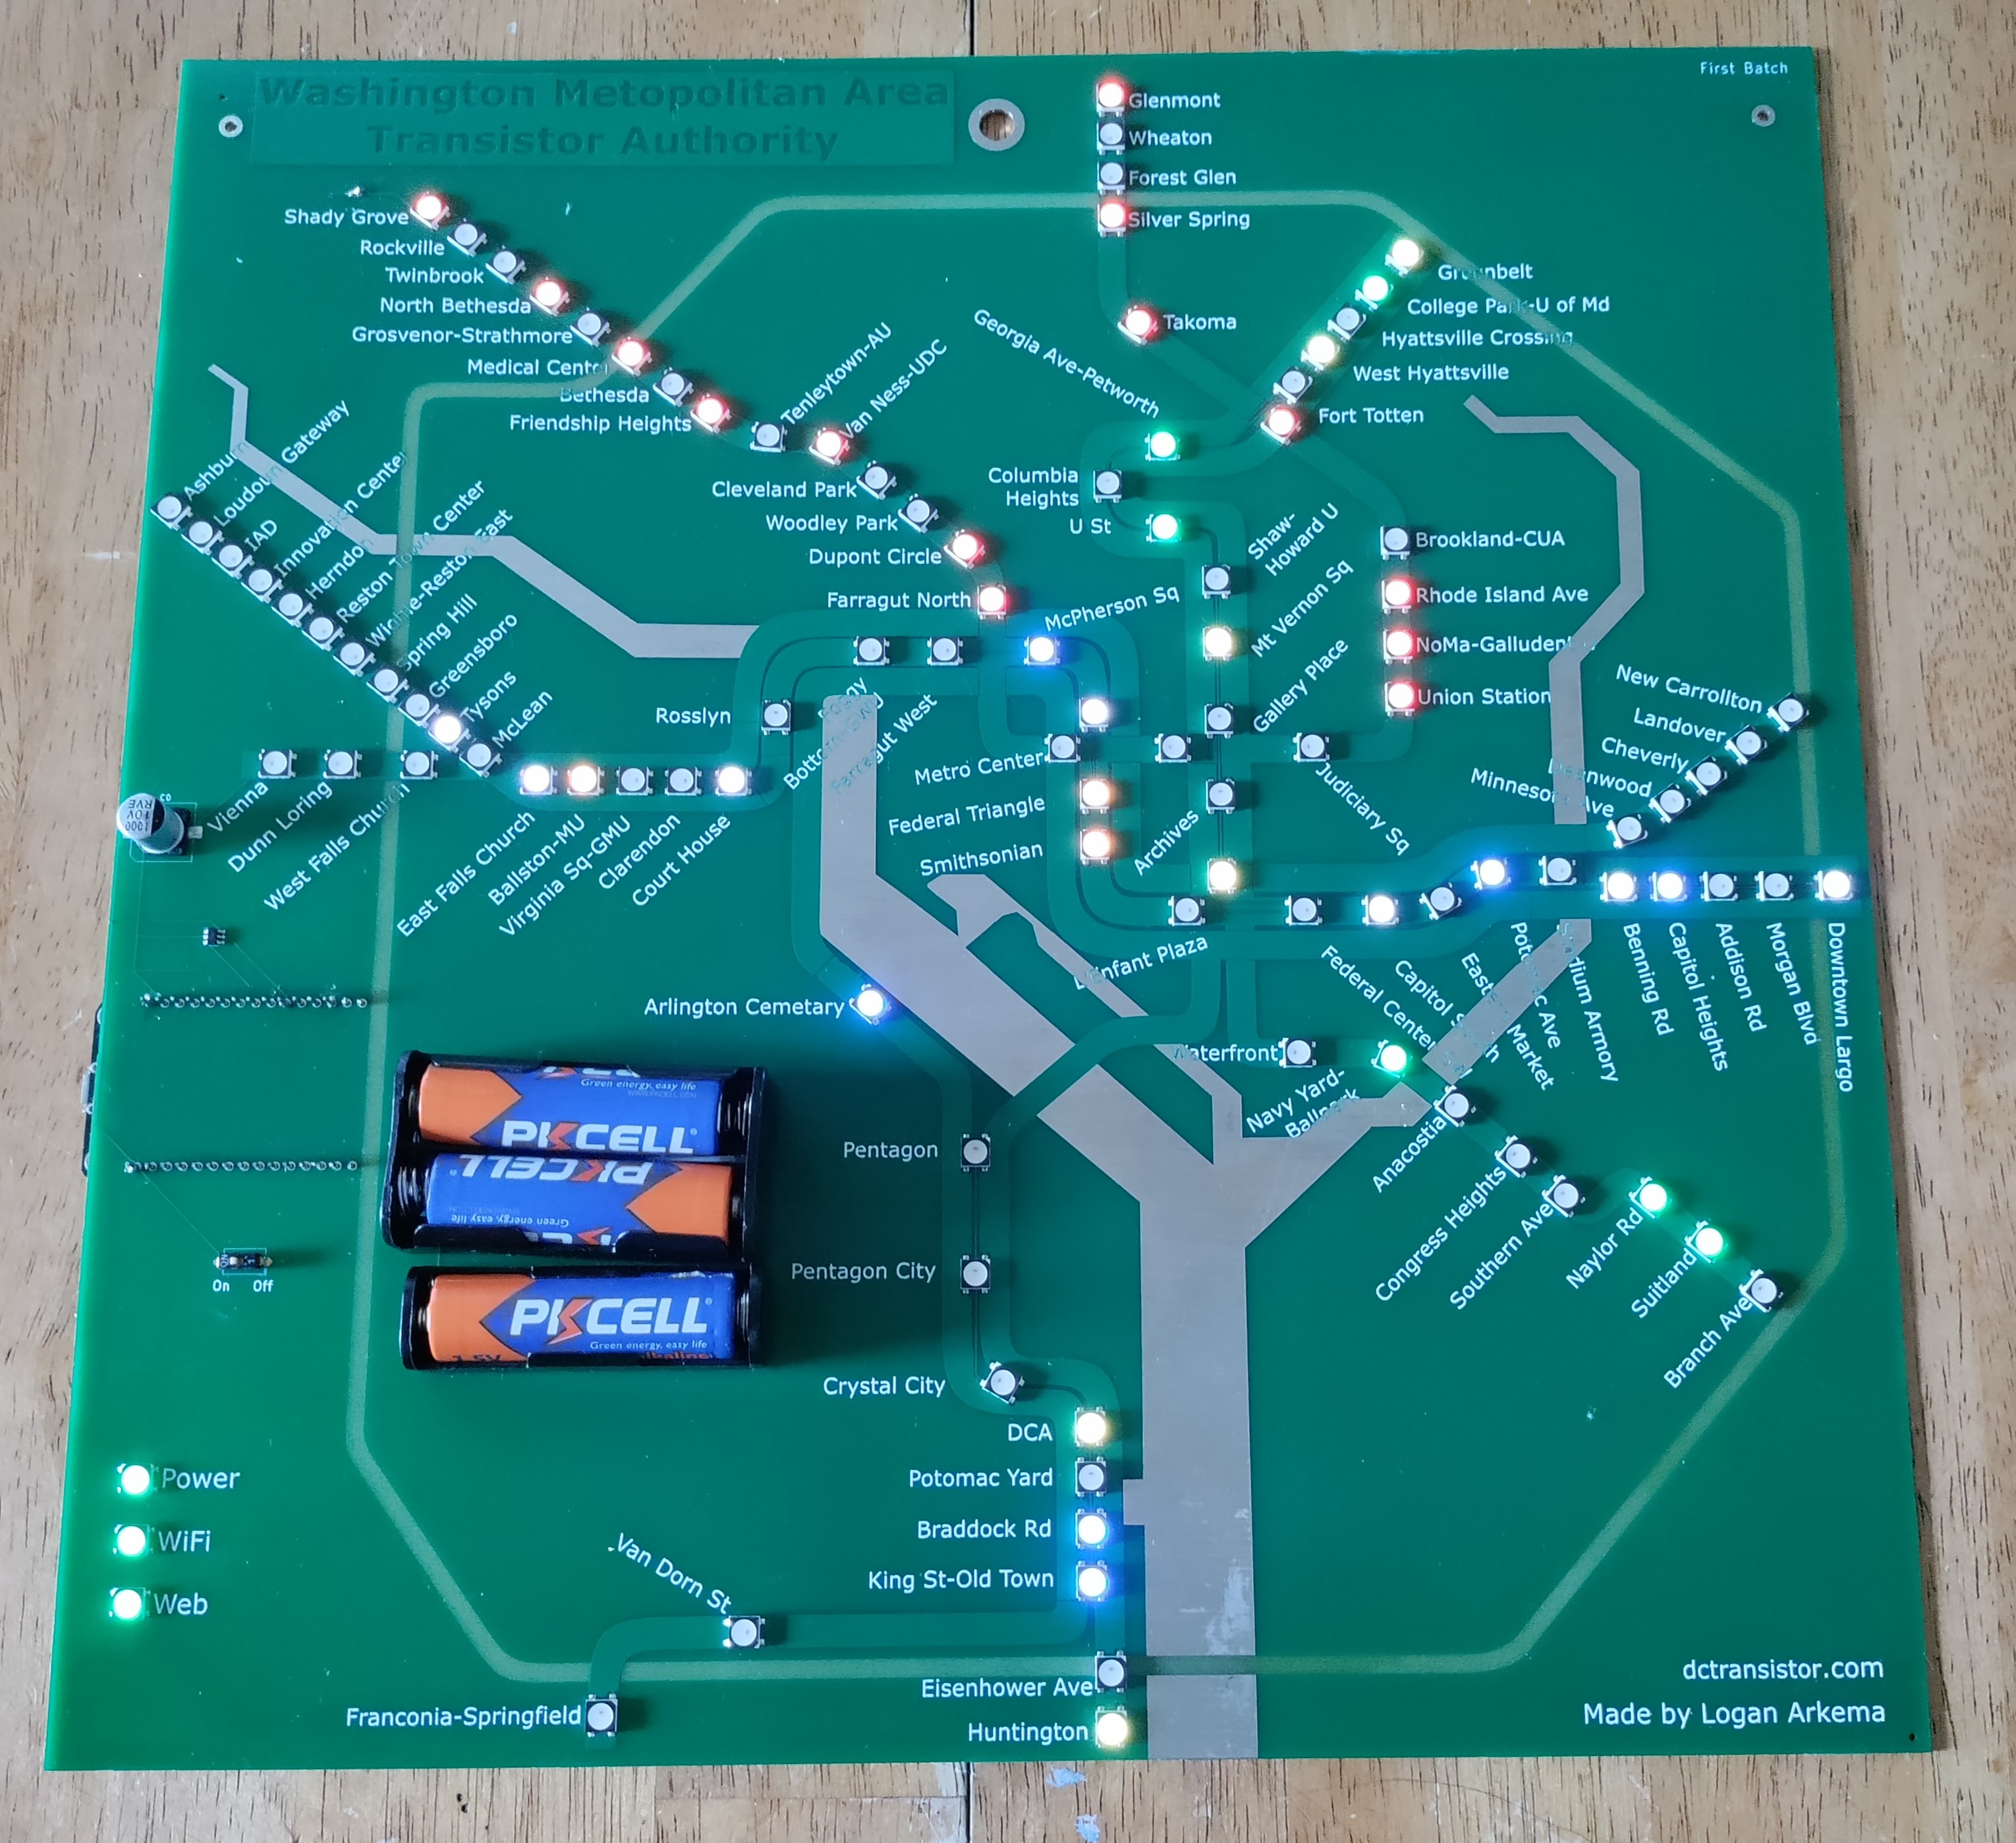 Picture of a dctransistor board.